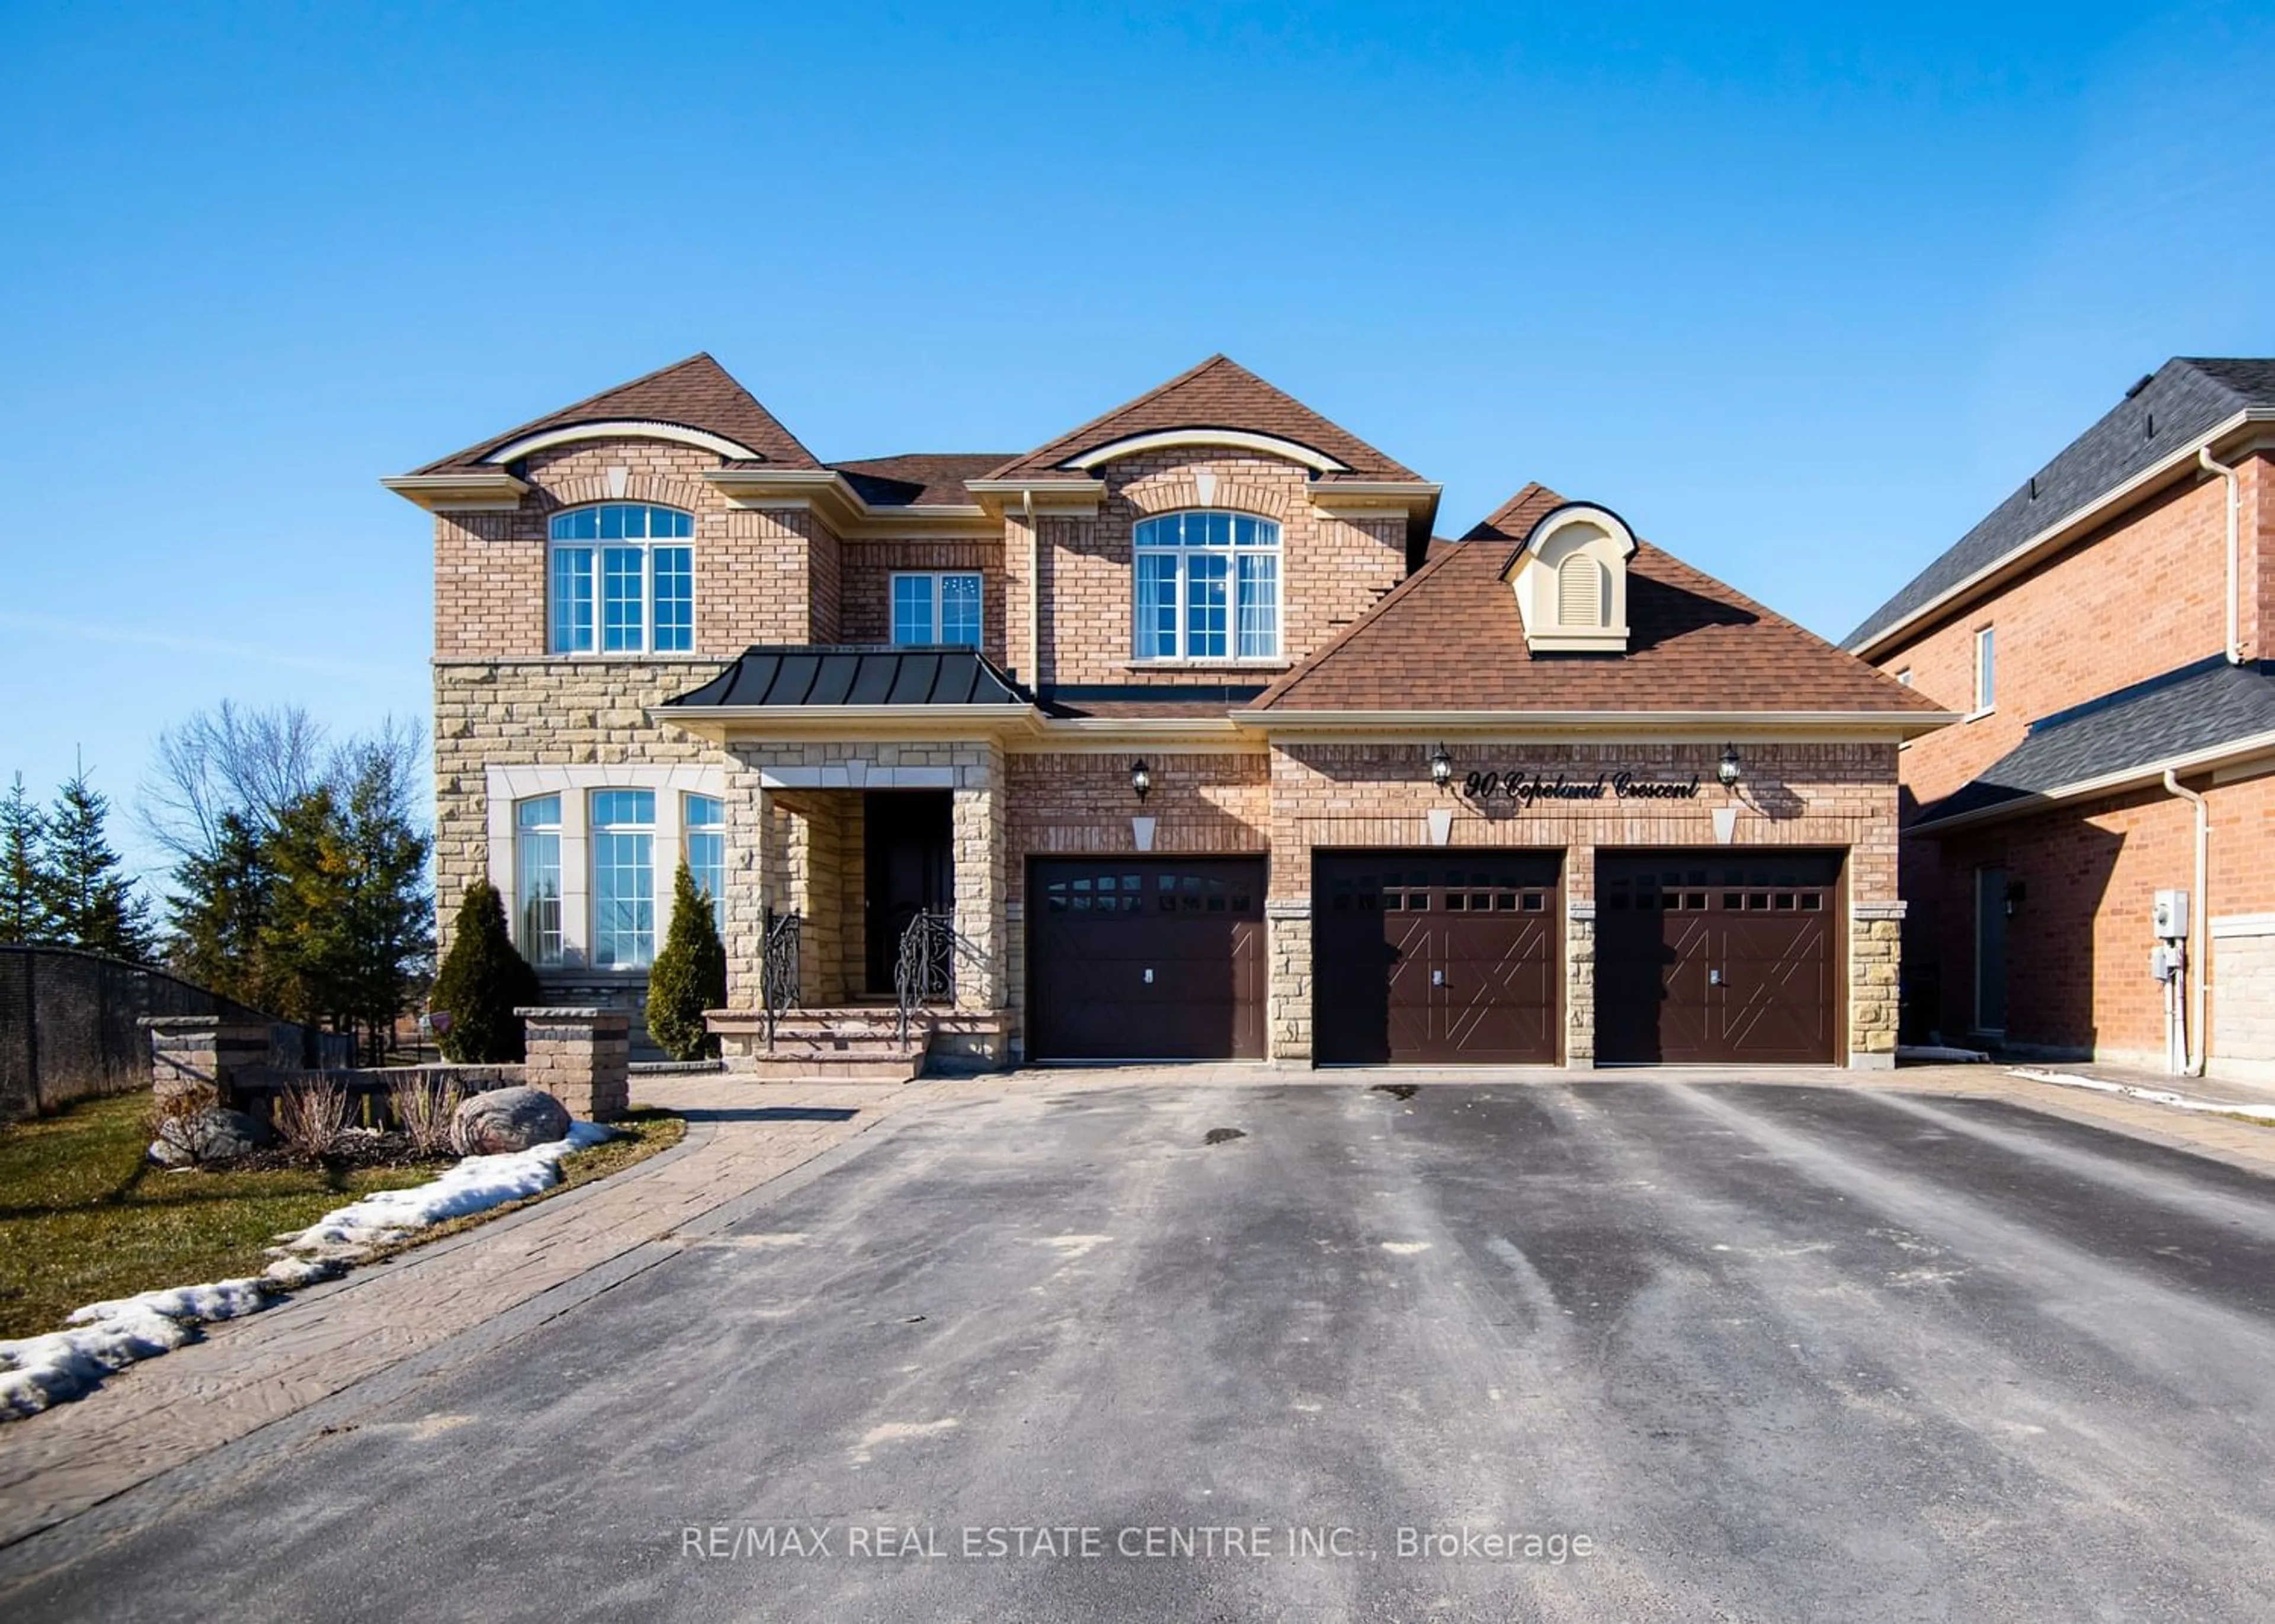 Home with brick exterior material for 90 Copeland Cres, Innisfil Ontario L0L 1L0